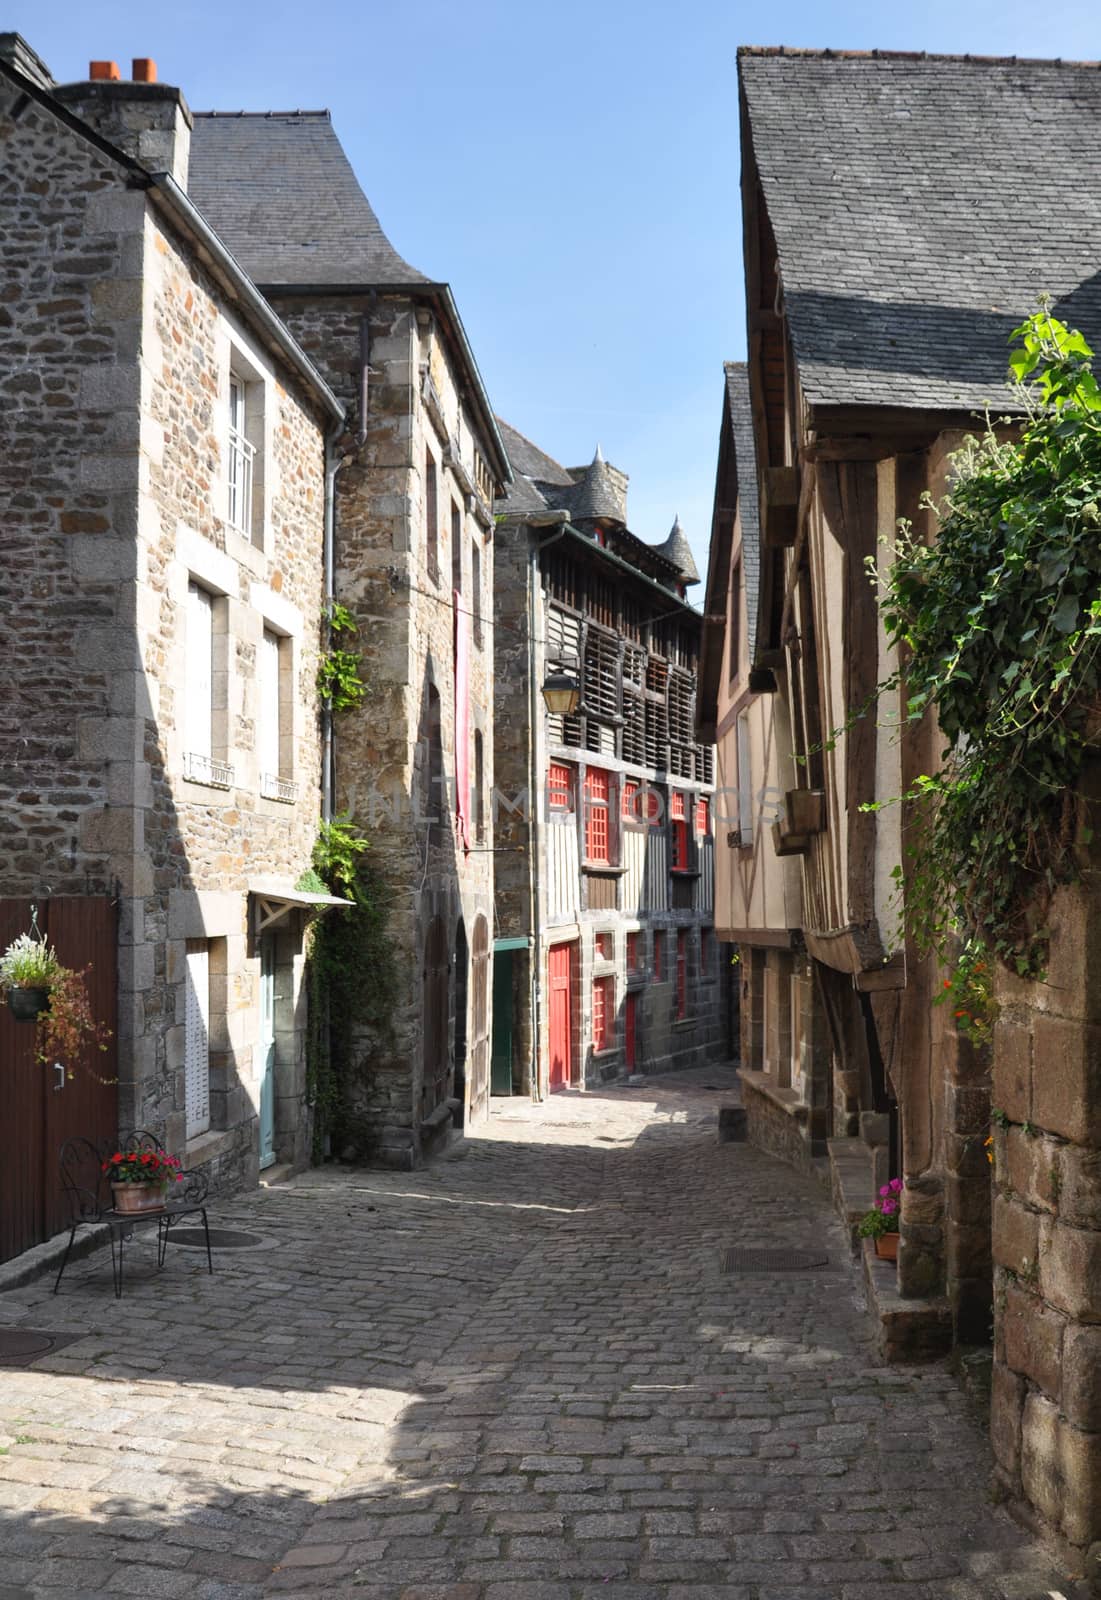 Medieval buildings in the ancient french town of Dinan in Brittany. These old houses are in the Rue du Petit Port which leads to the River Rance and port area of the town.